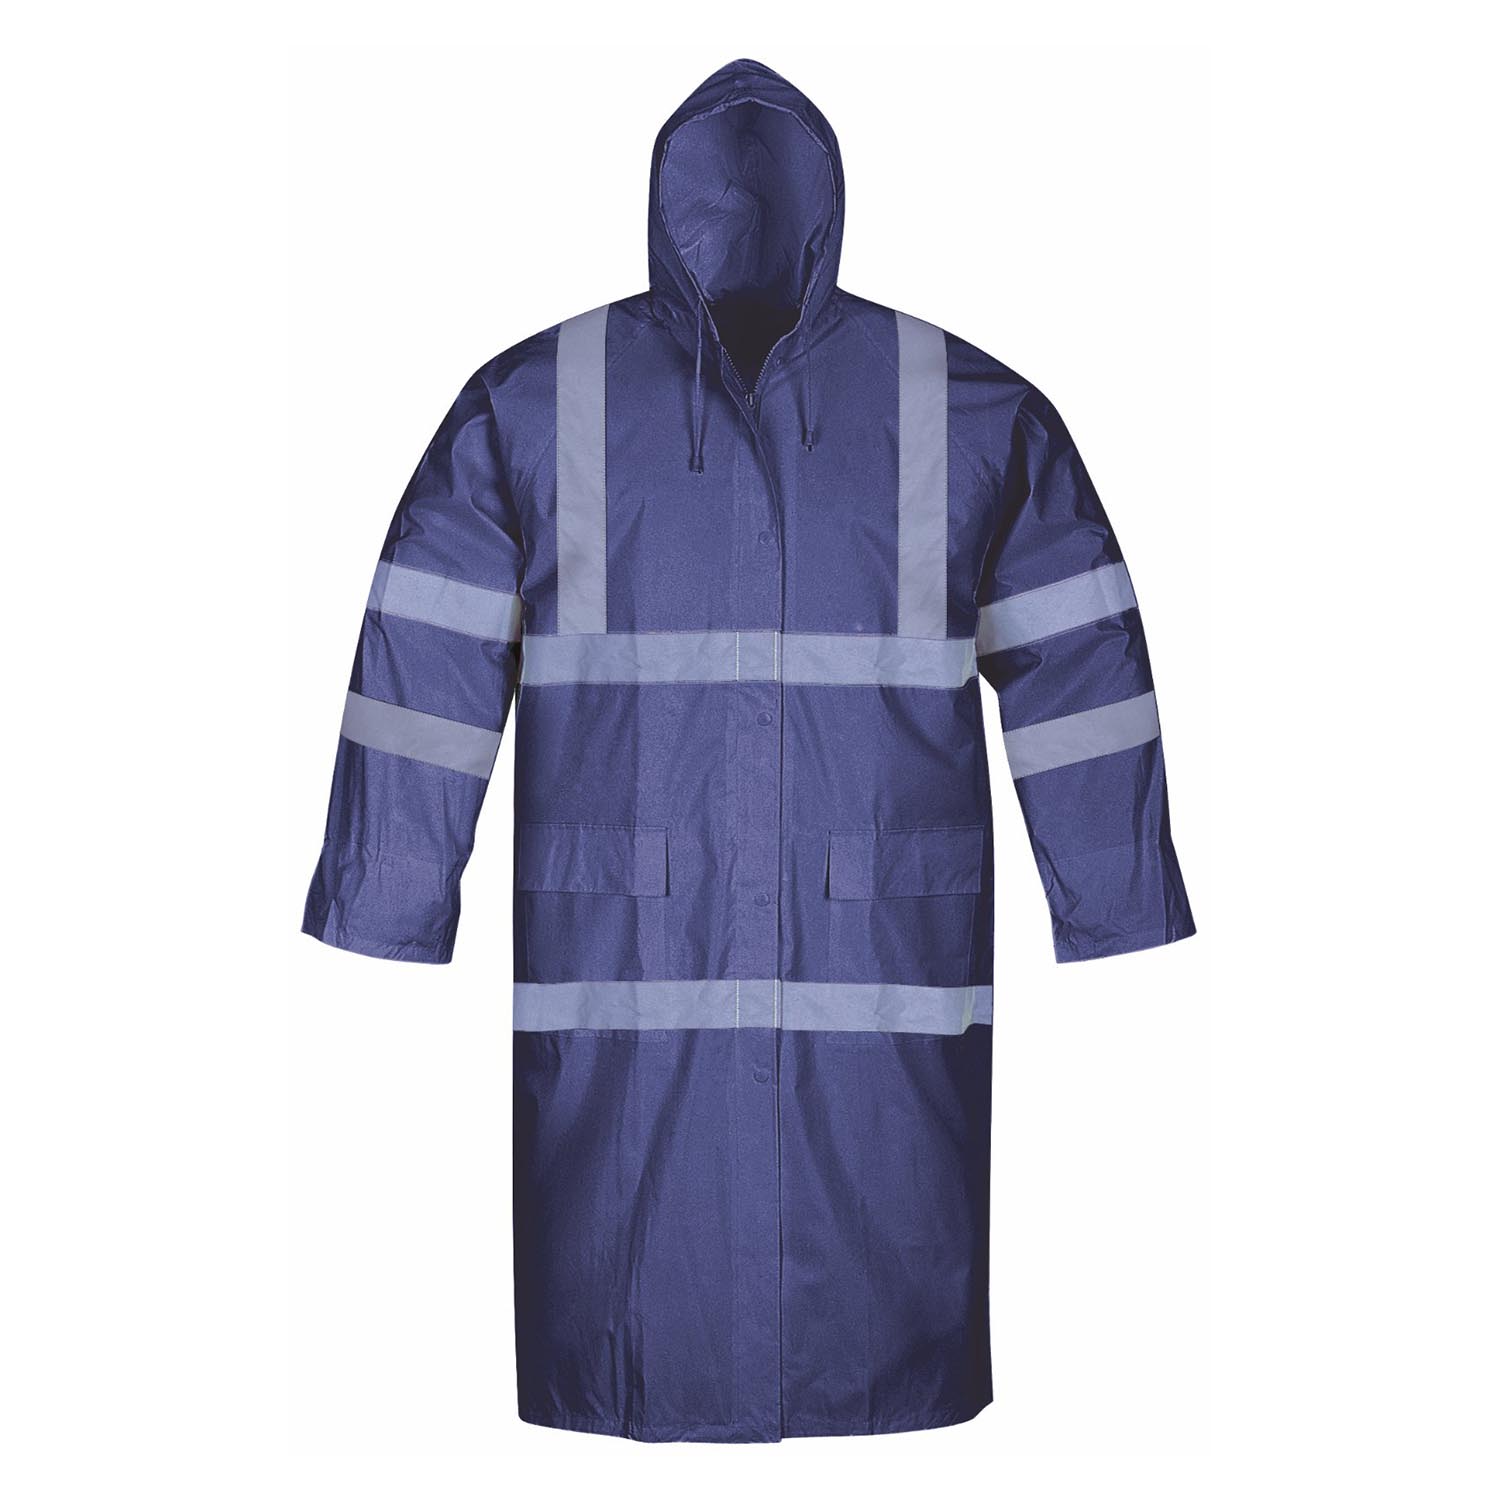 Raincoat with High Visibility Reflective Tapes